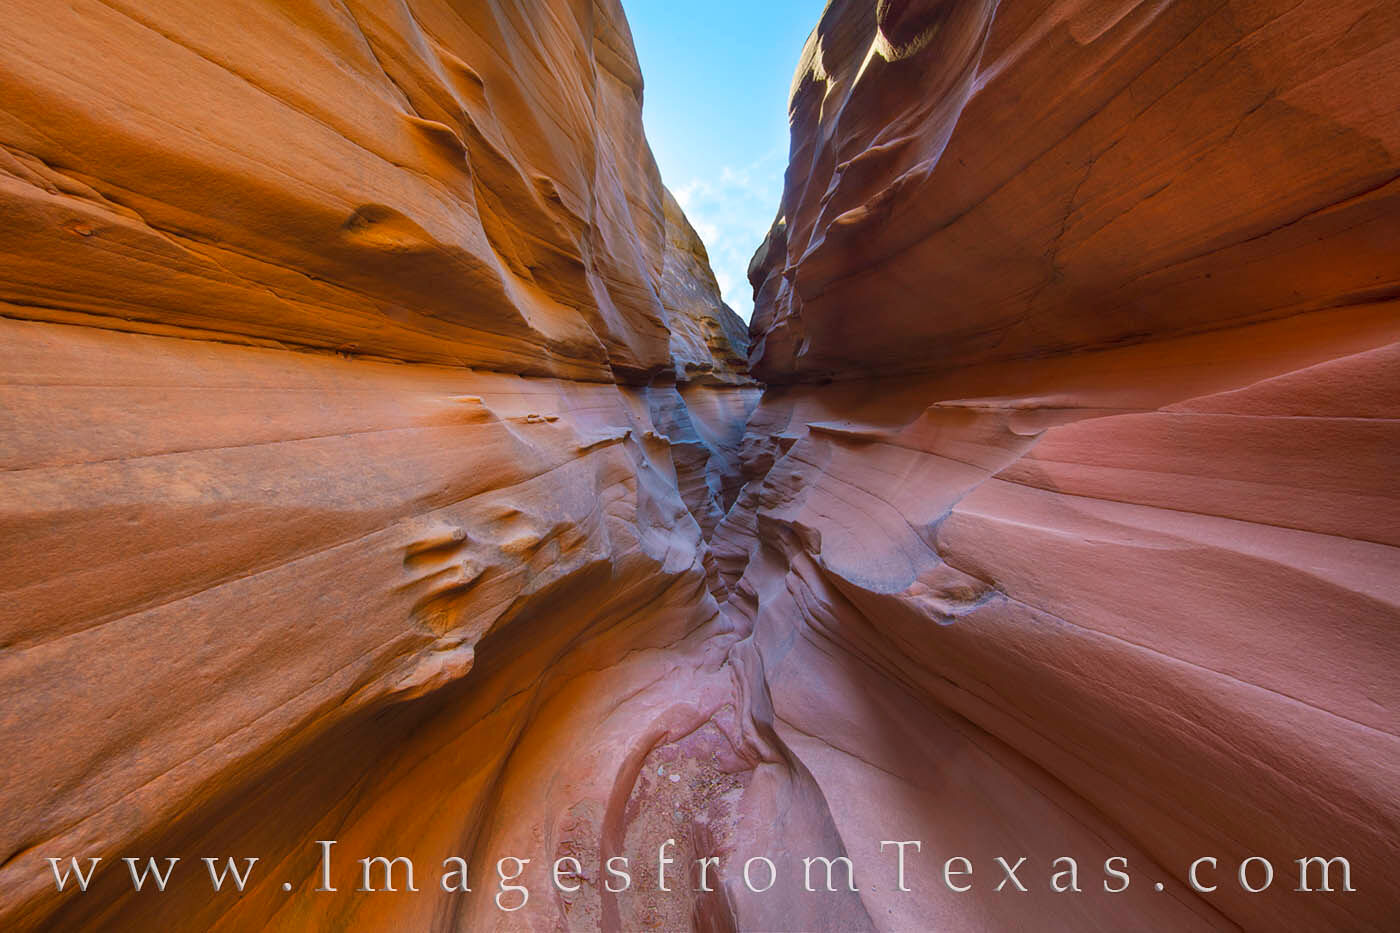 Texas slot canyons are rare and beautiful. While most folks may be familiar with those in Arizona and Utah, they are not aware...